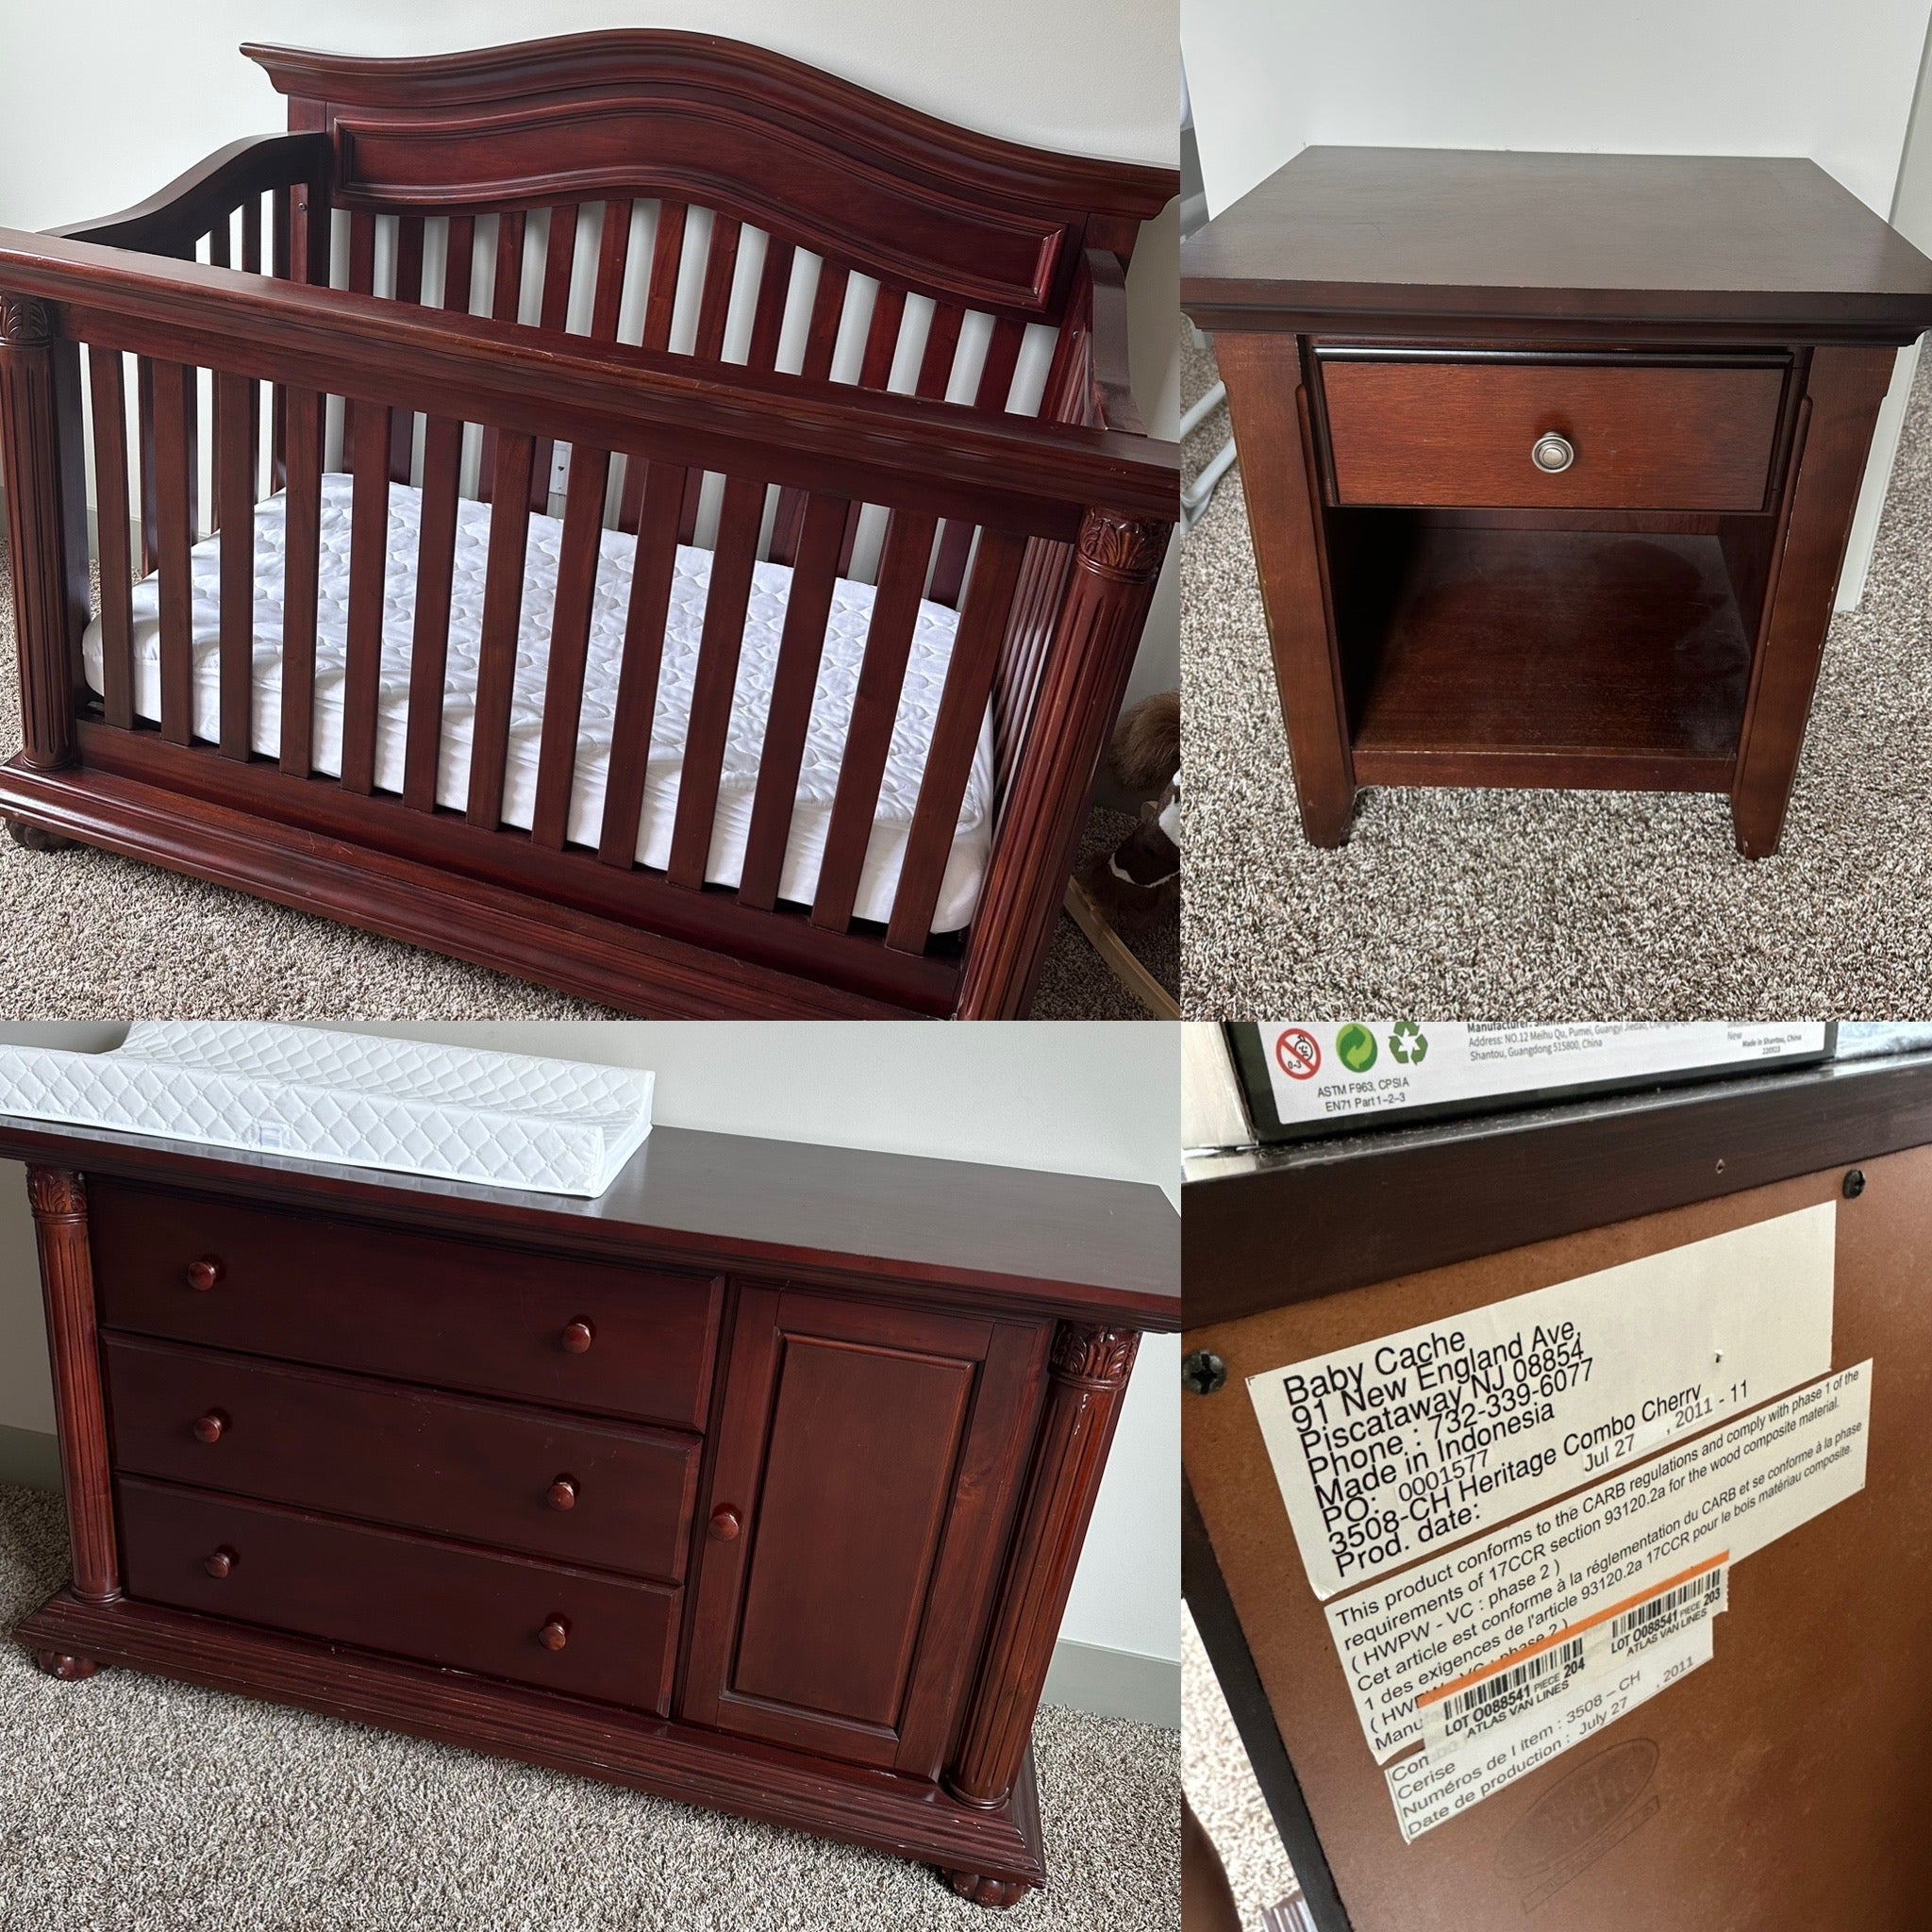 Baby Cache Convertible Crib, Changing Table and Nightstand